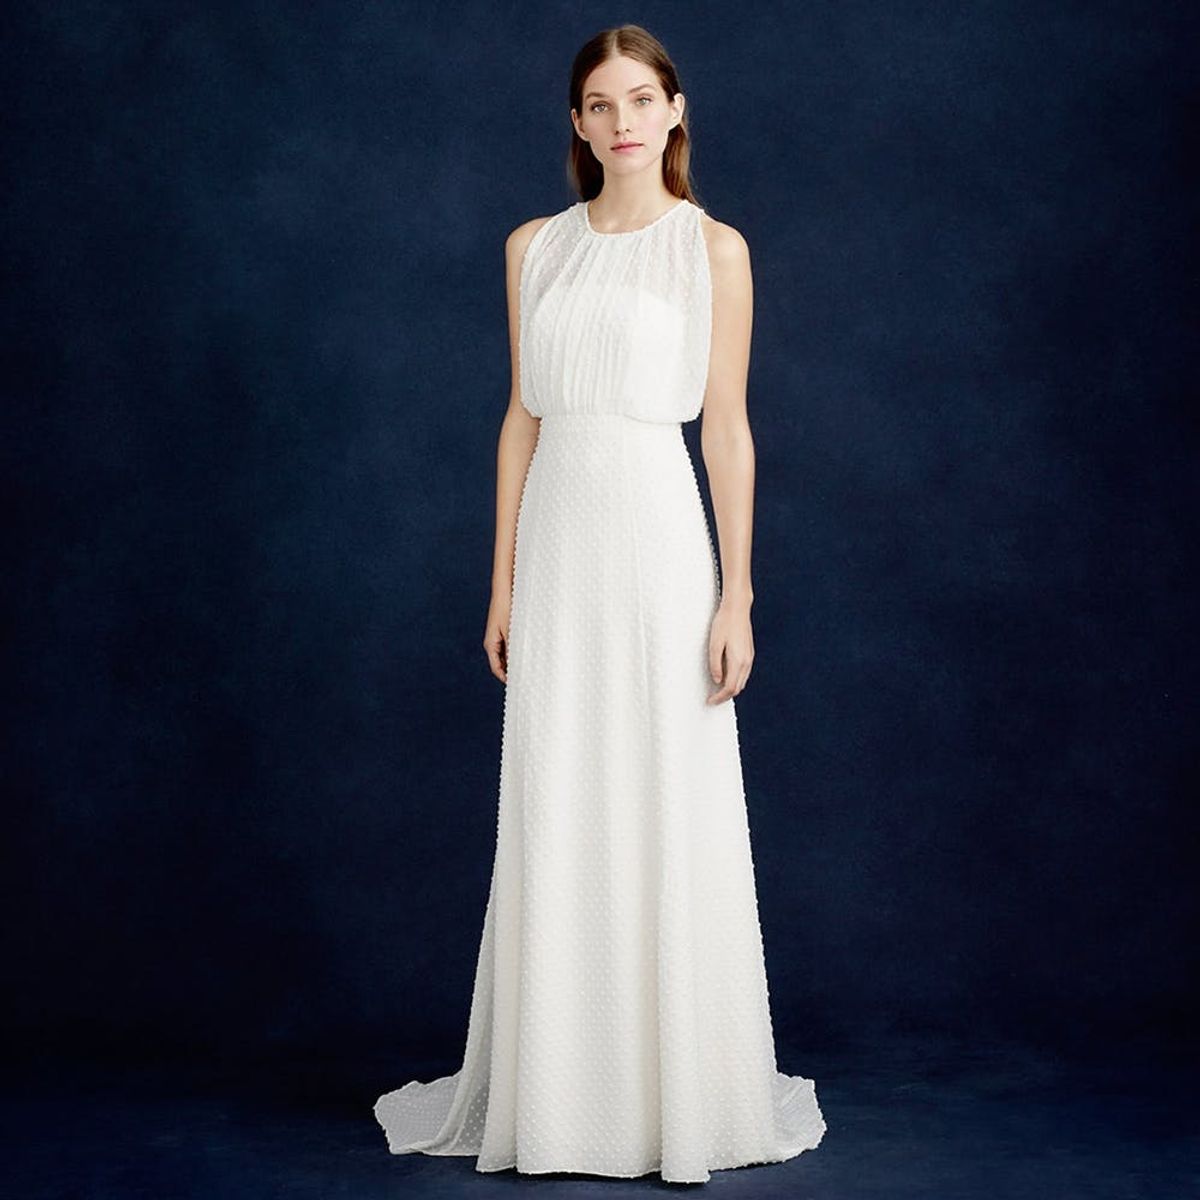 J.Crew’s Spring Bridal Lookbook Is Made for the Modern Bride - Brit + Co